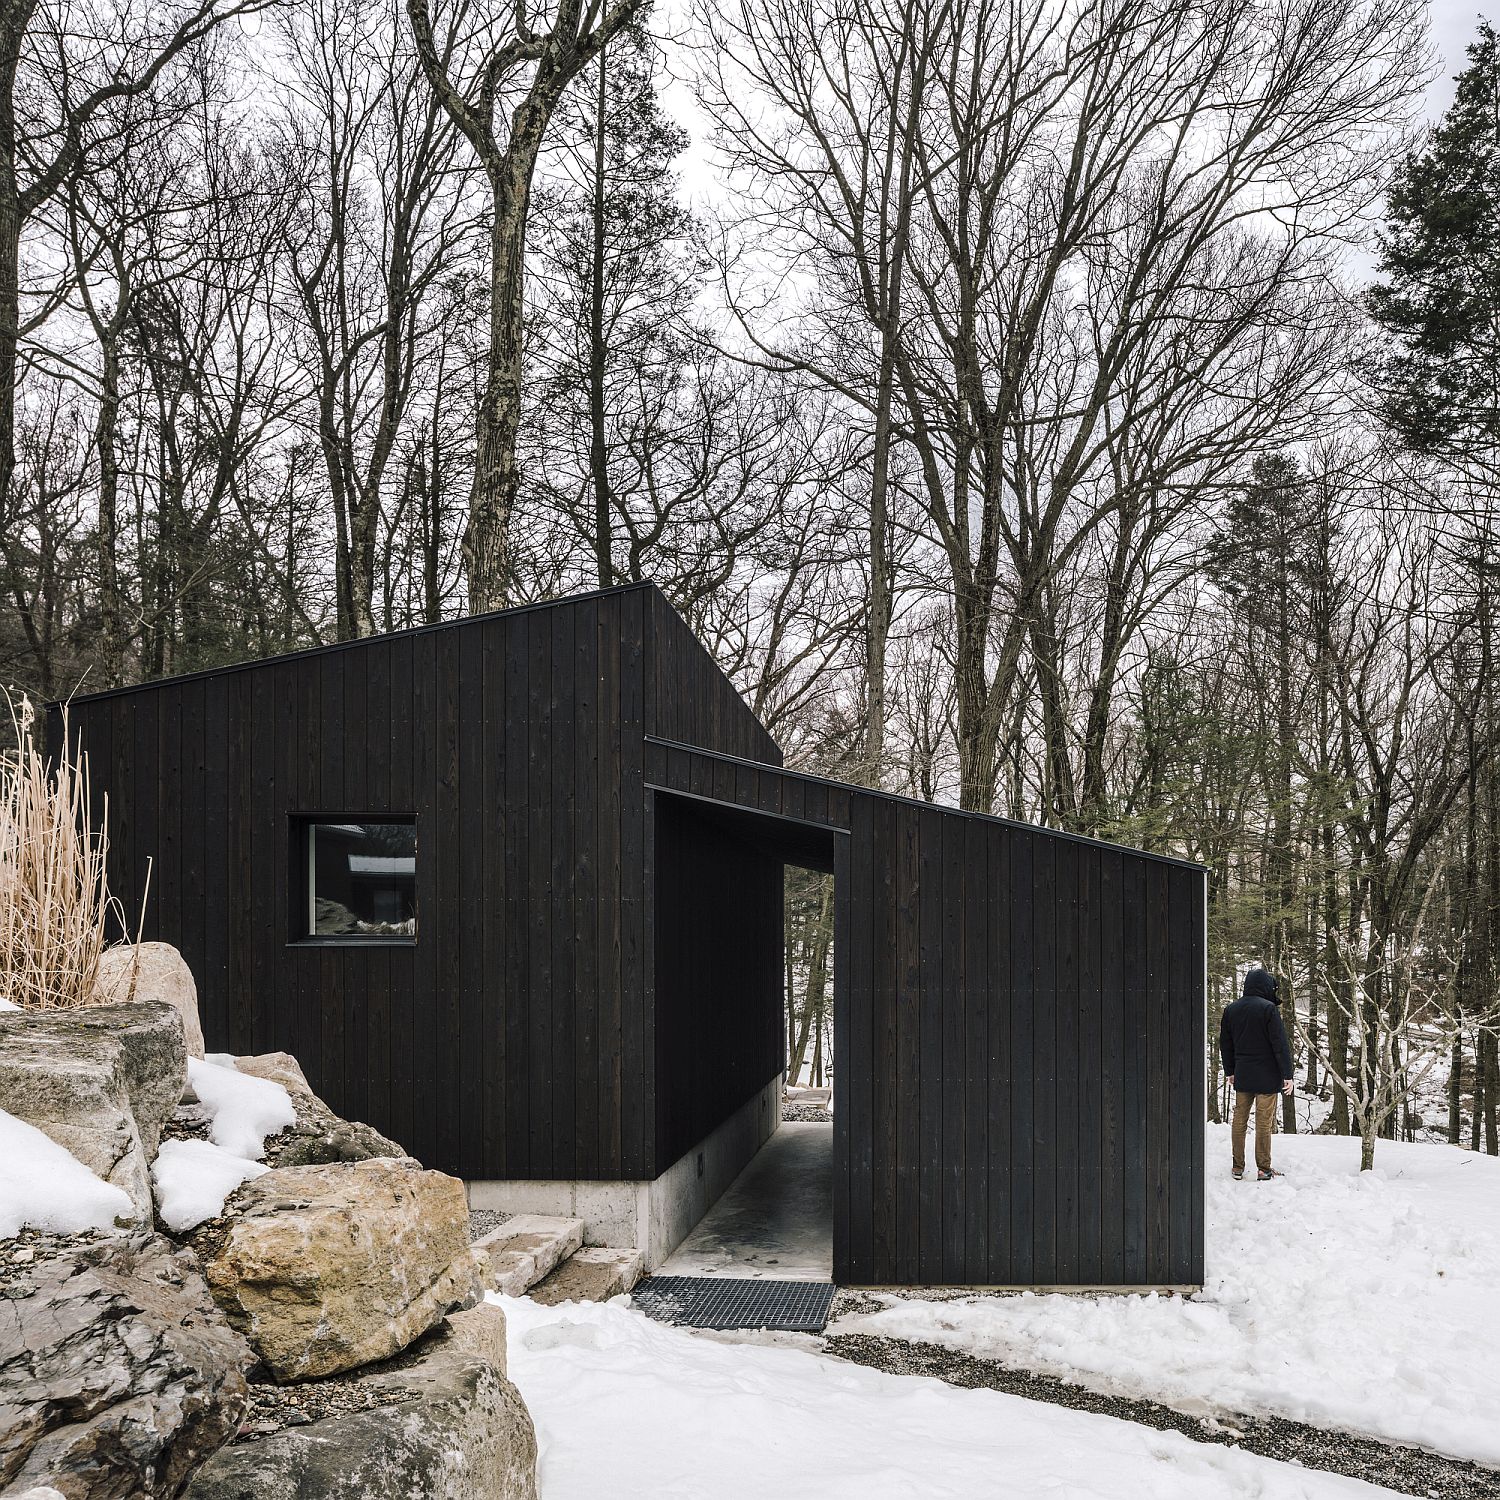 Dark wooden exterior allows the cabin to blend in with the forest backdrop